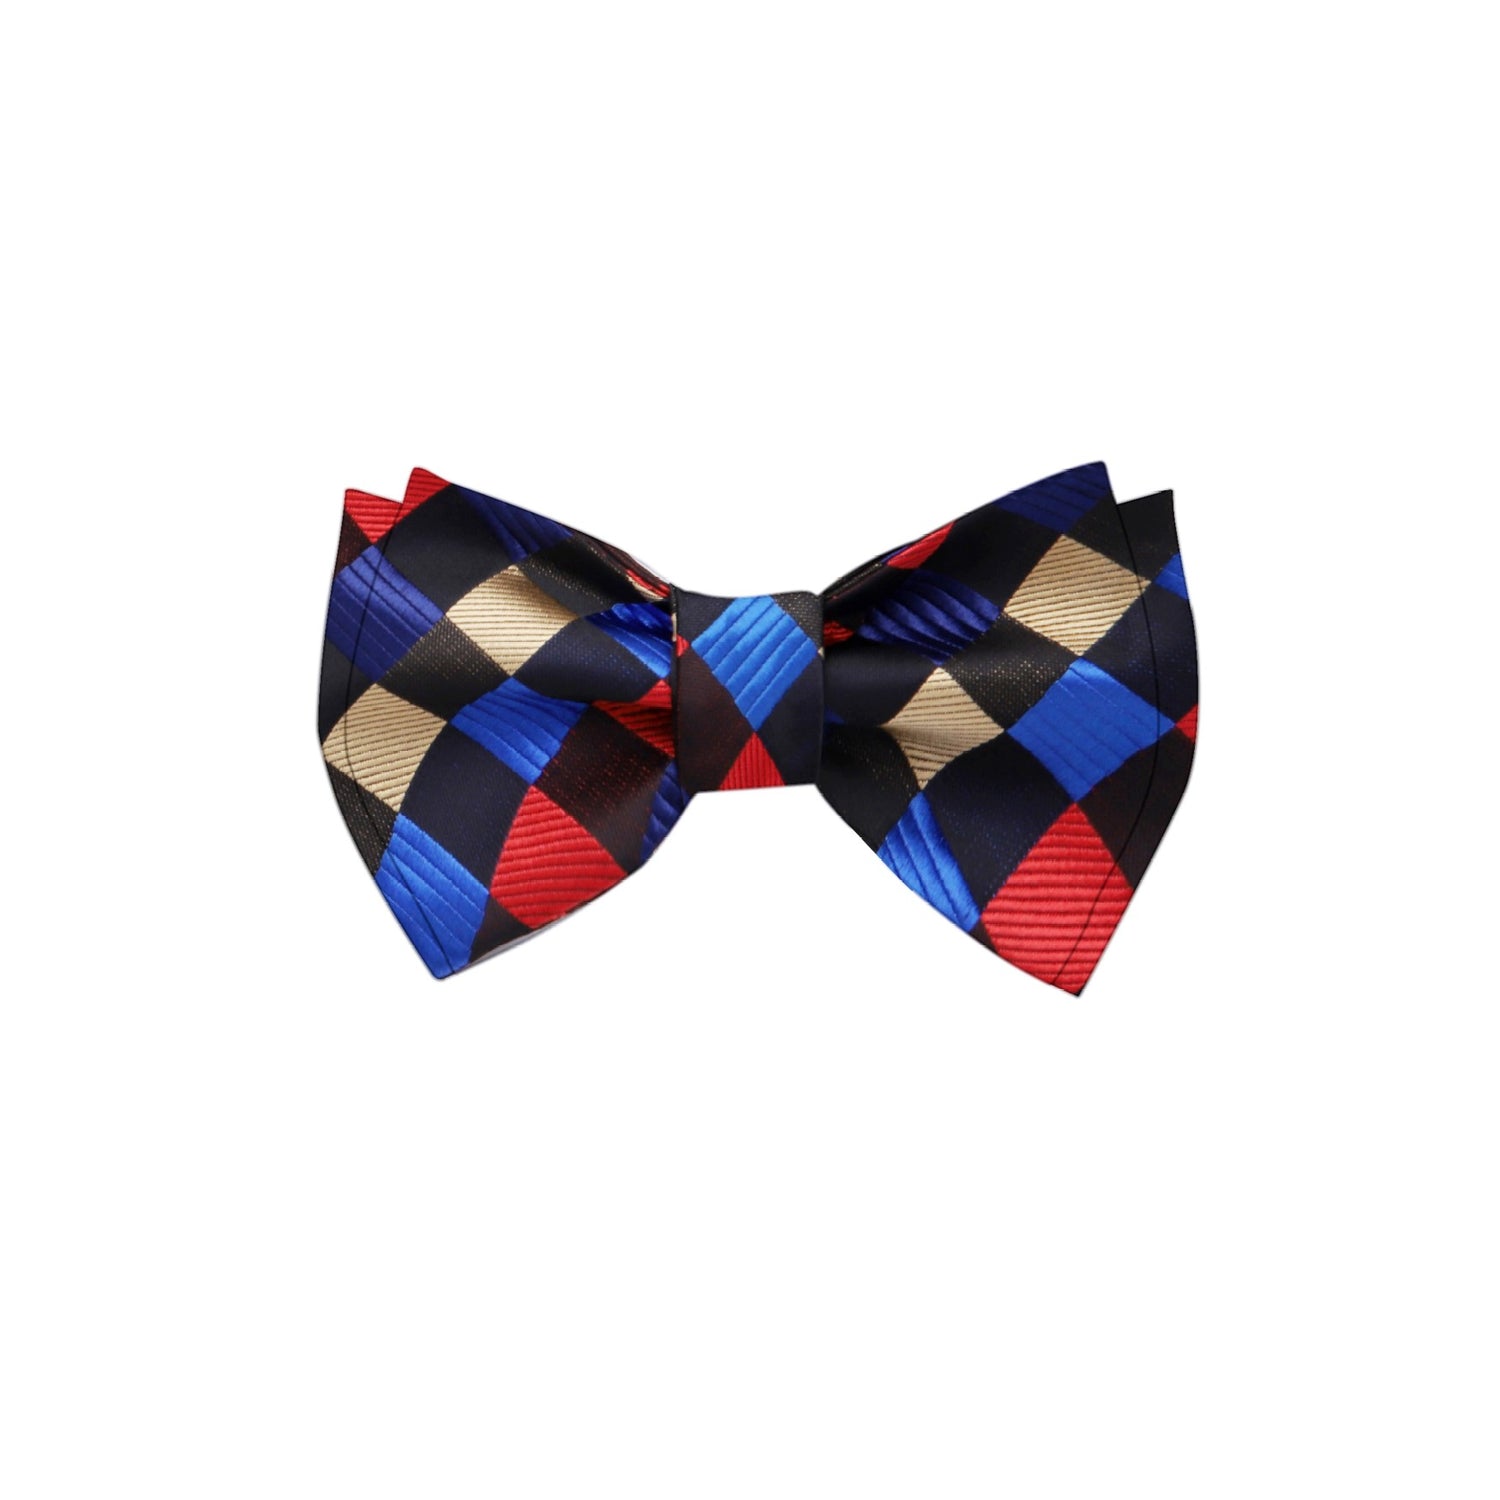 Black, Blue, Yellow and Red Geometric Bow Tie 